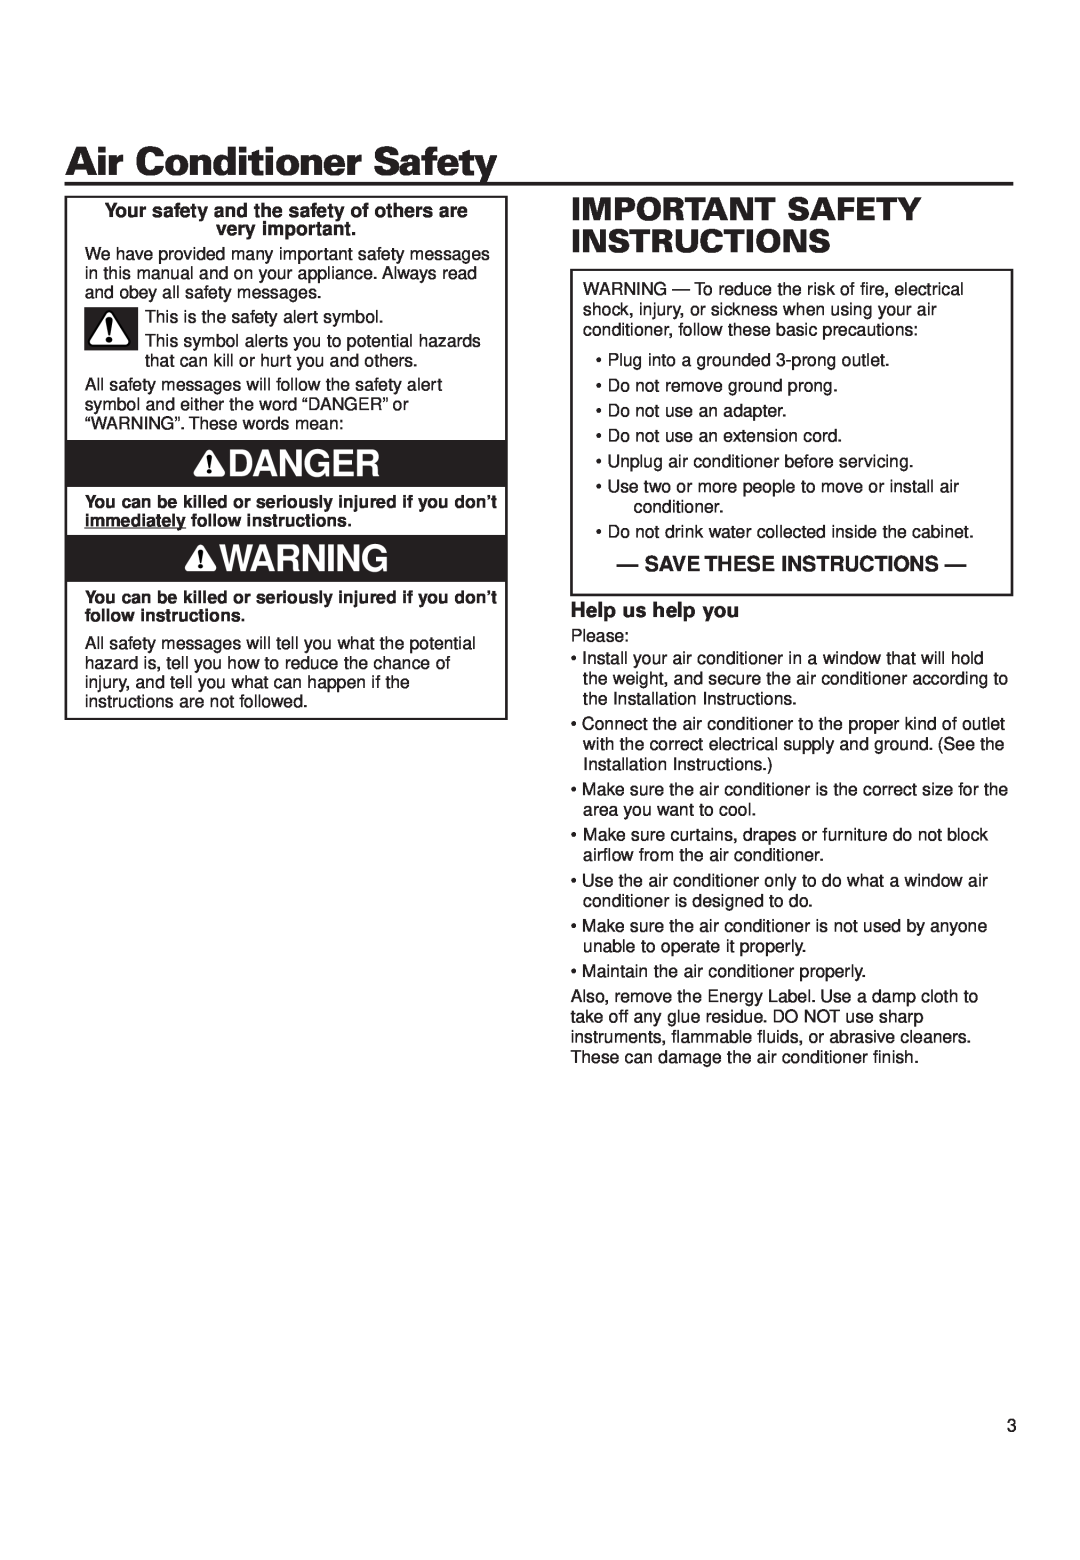 Whirlpool ACD052PK0 Air Conditioner Safety, Danger, Important Safety Instructions, Save These Instructions, very important 